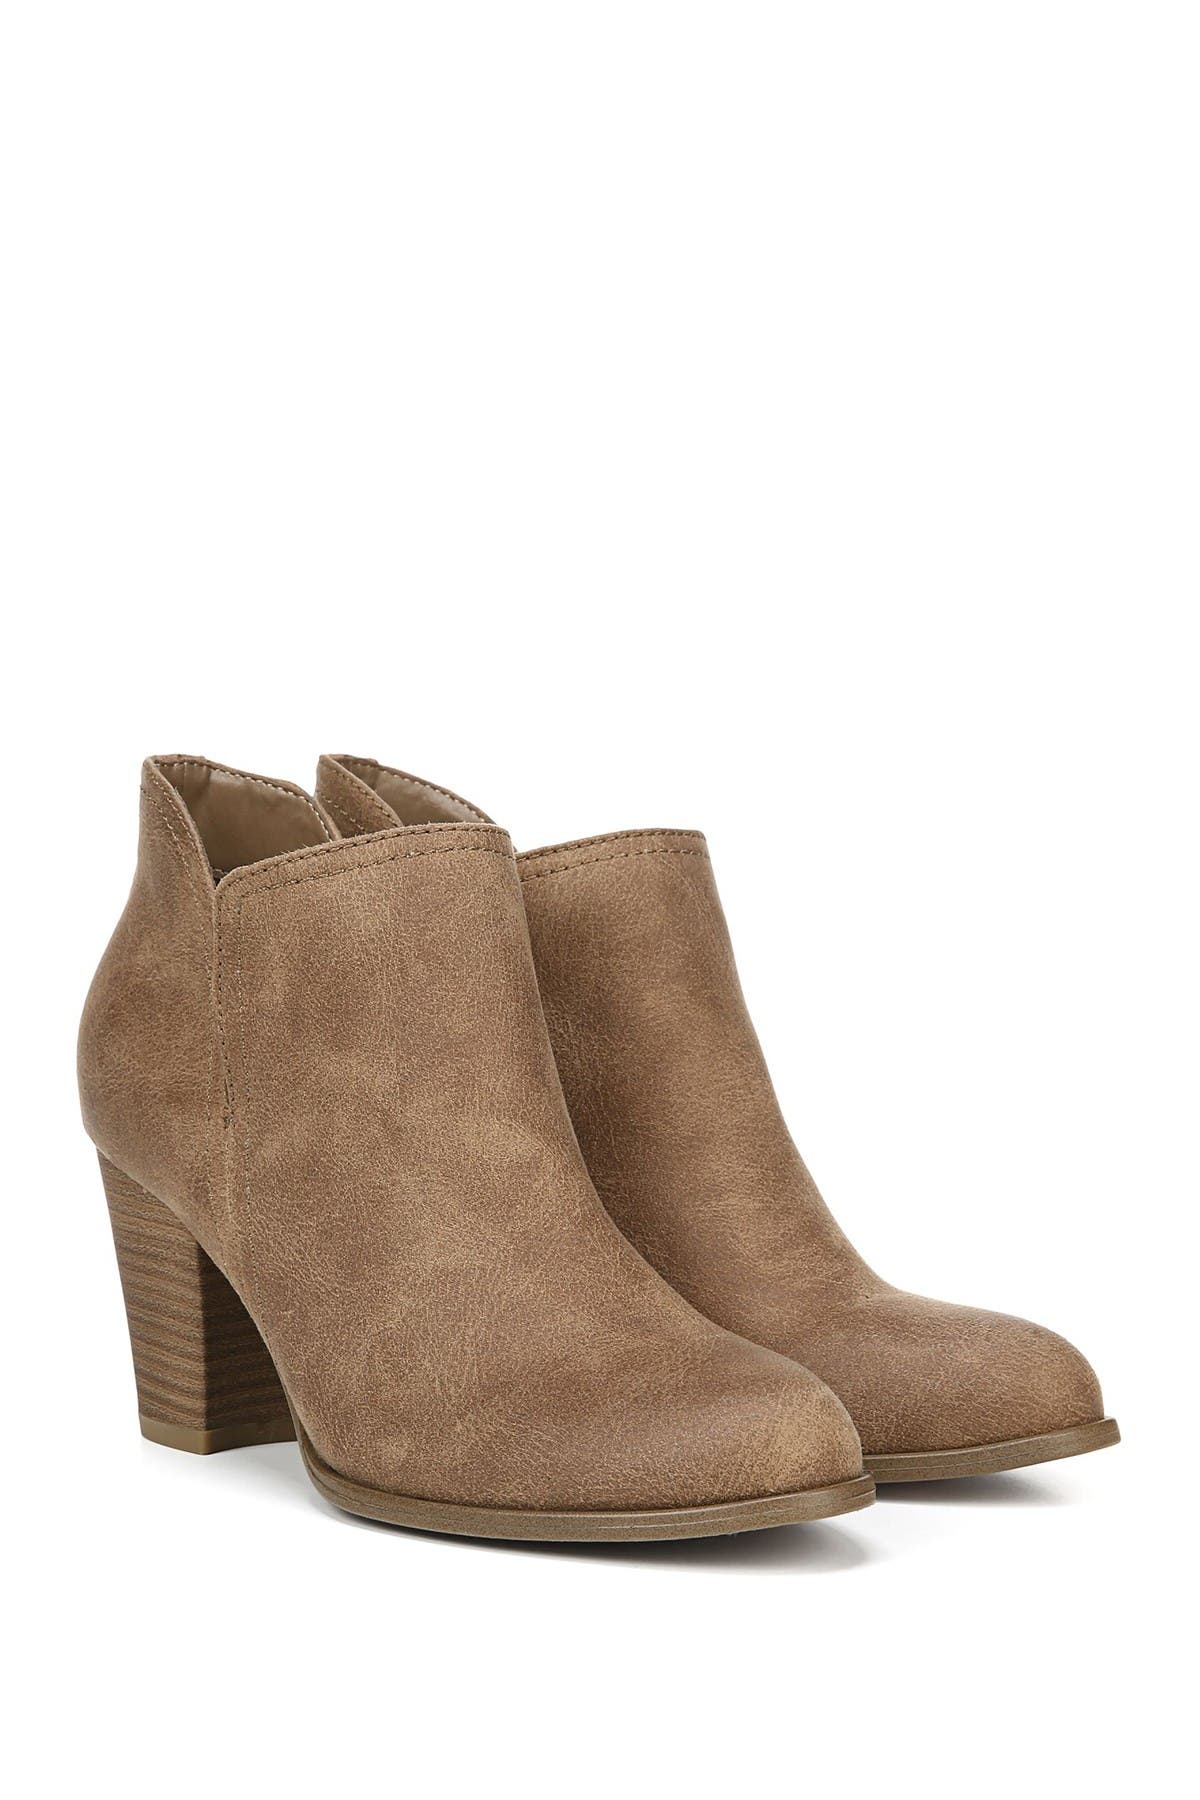 Fergalicious | Charley Vented Bootie 